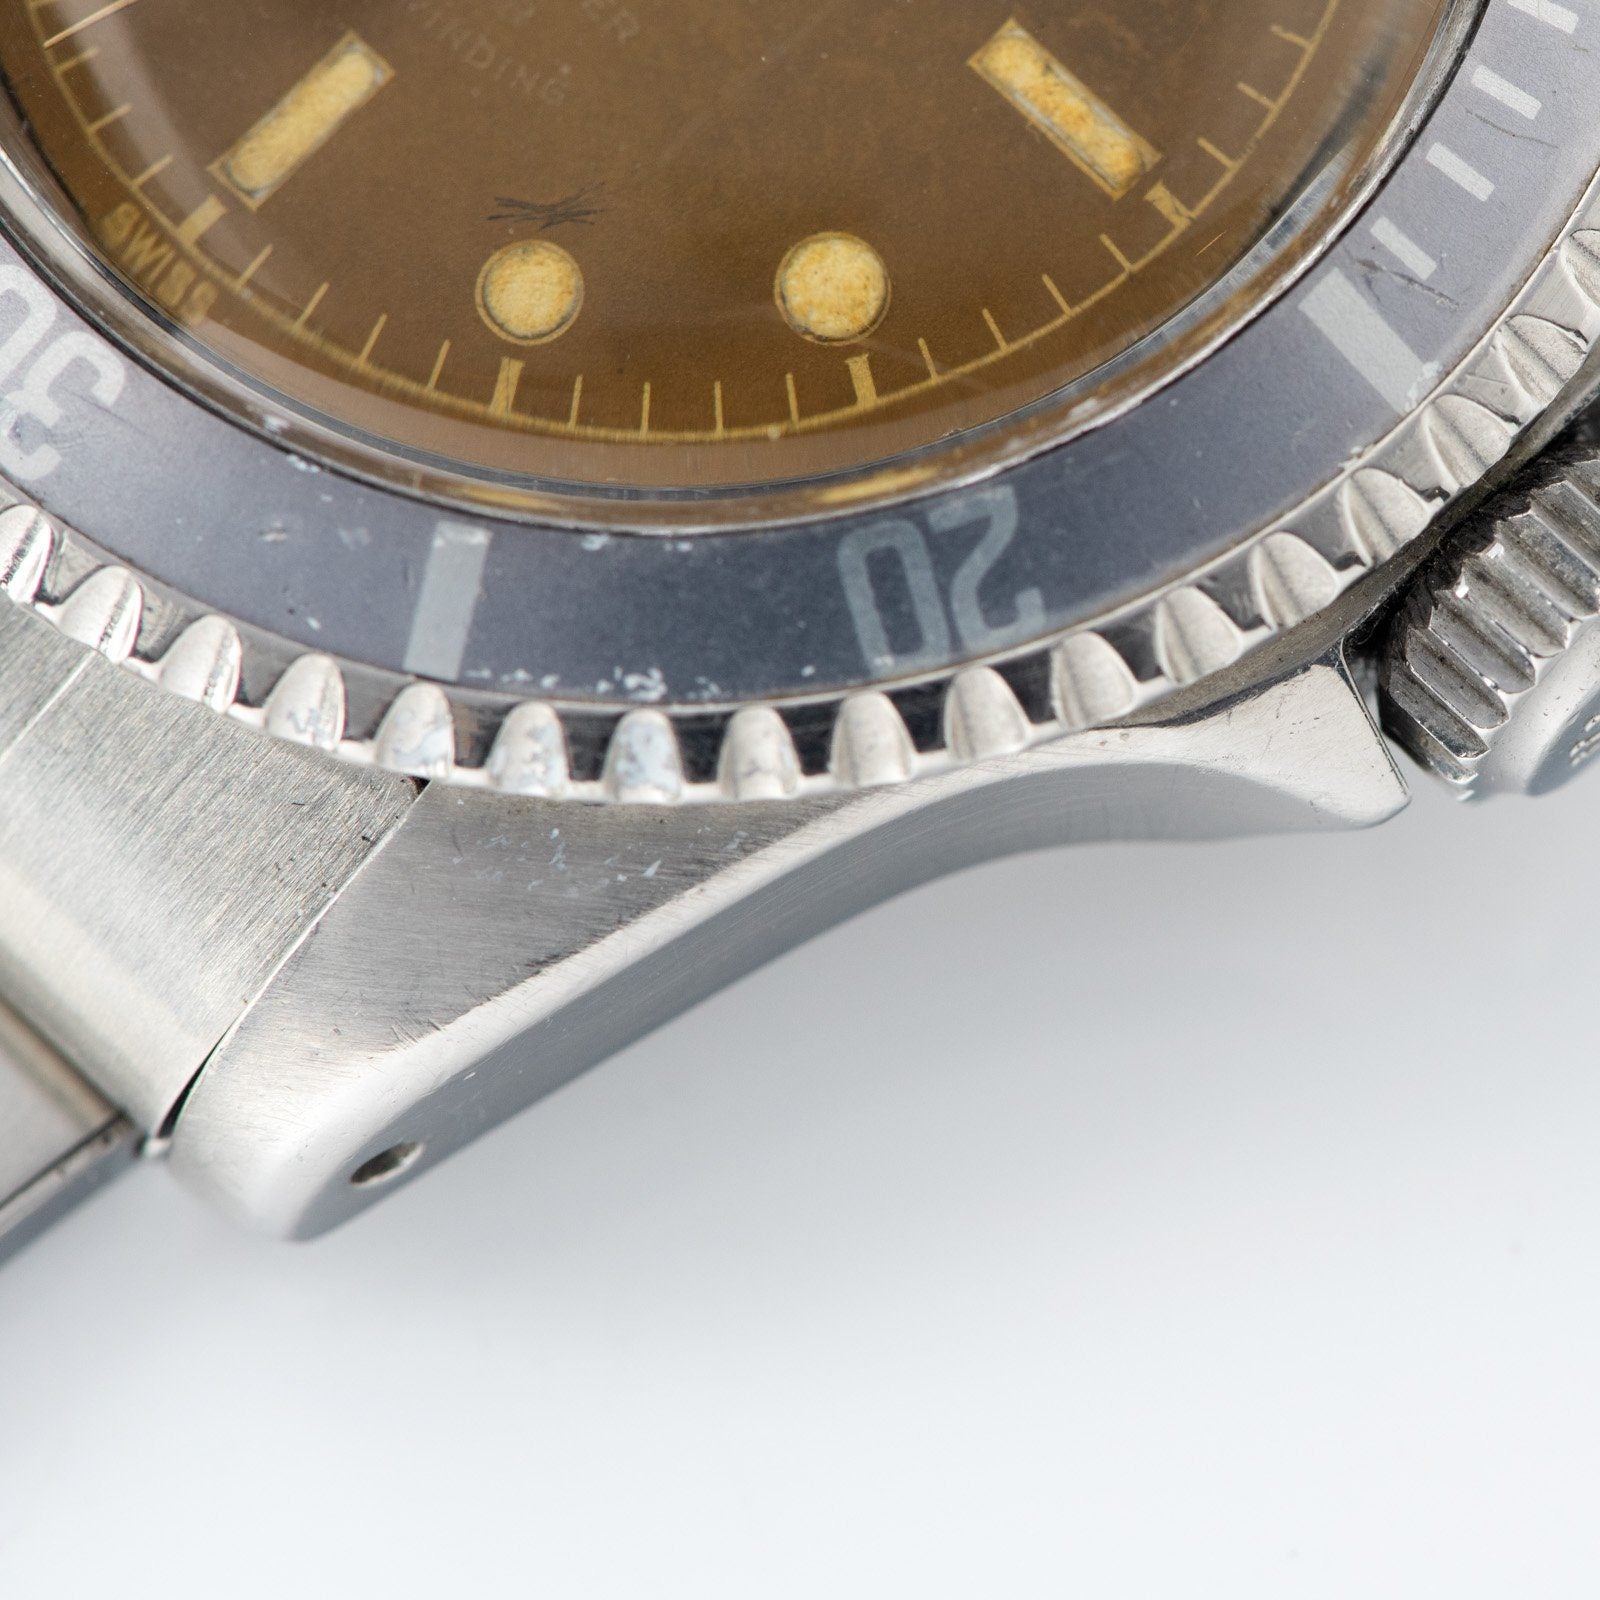 Tudor Submariner Ref 7928 with Incredible Tropical Dial